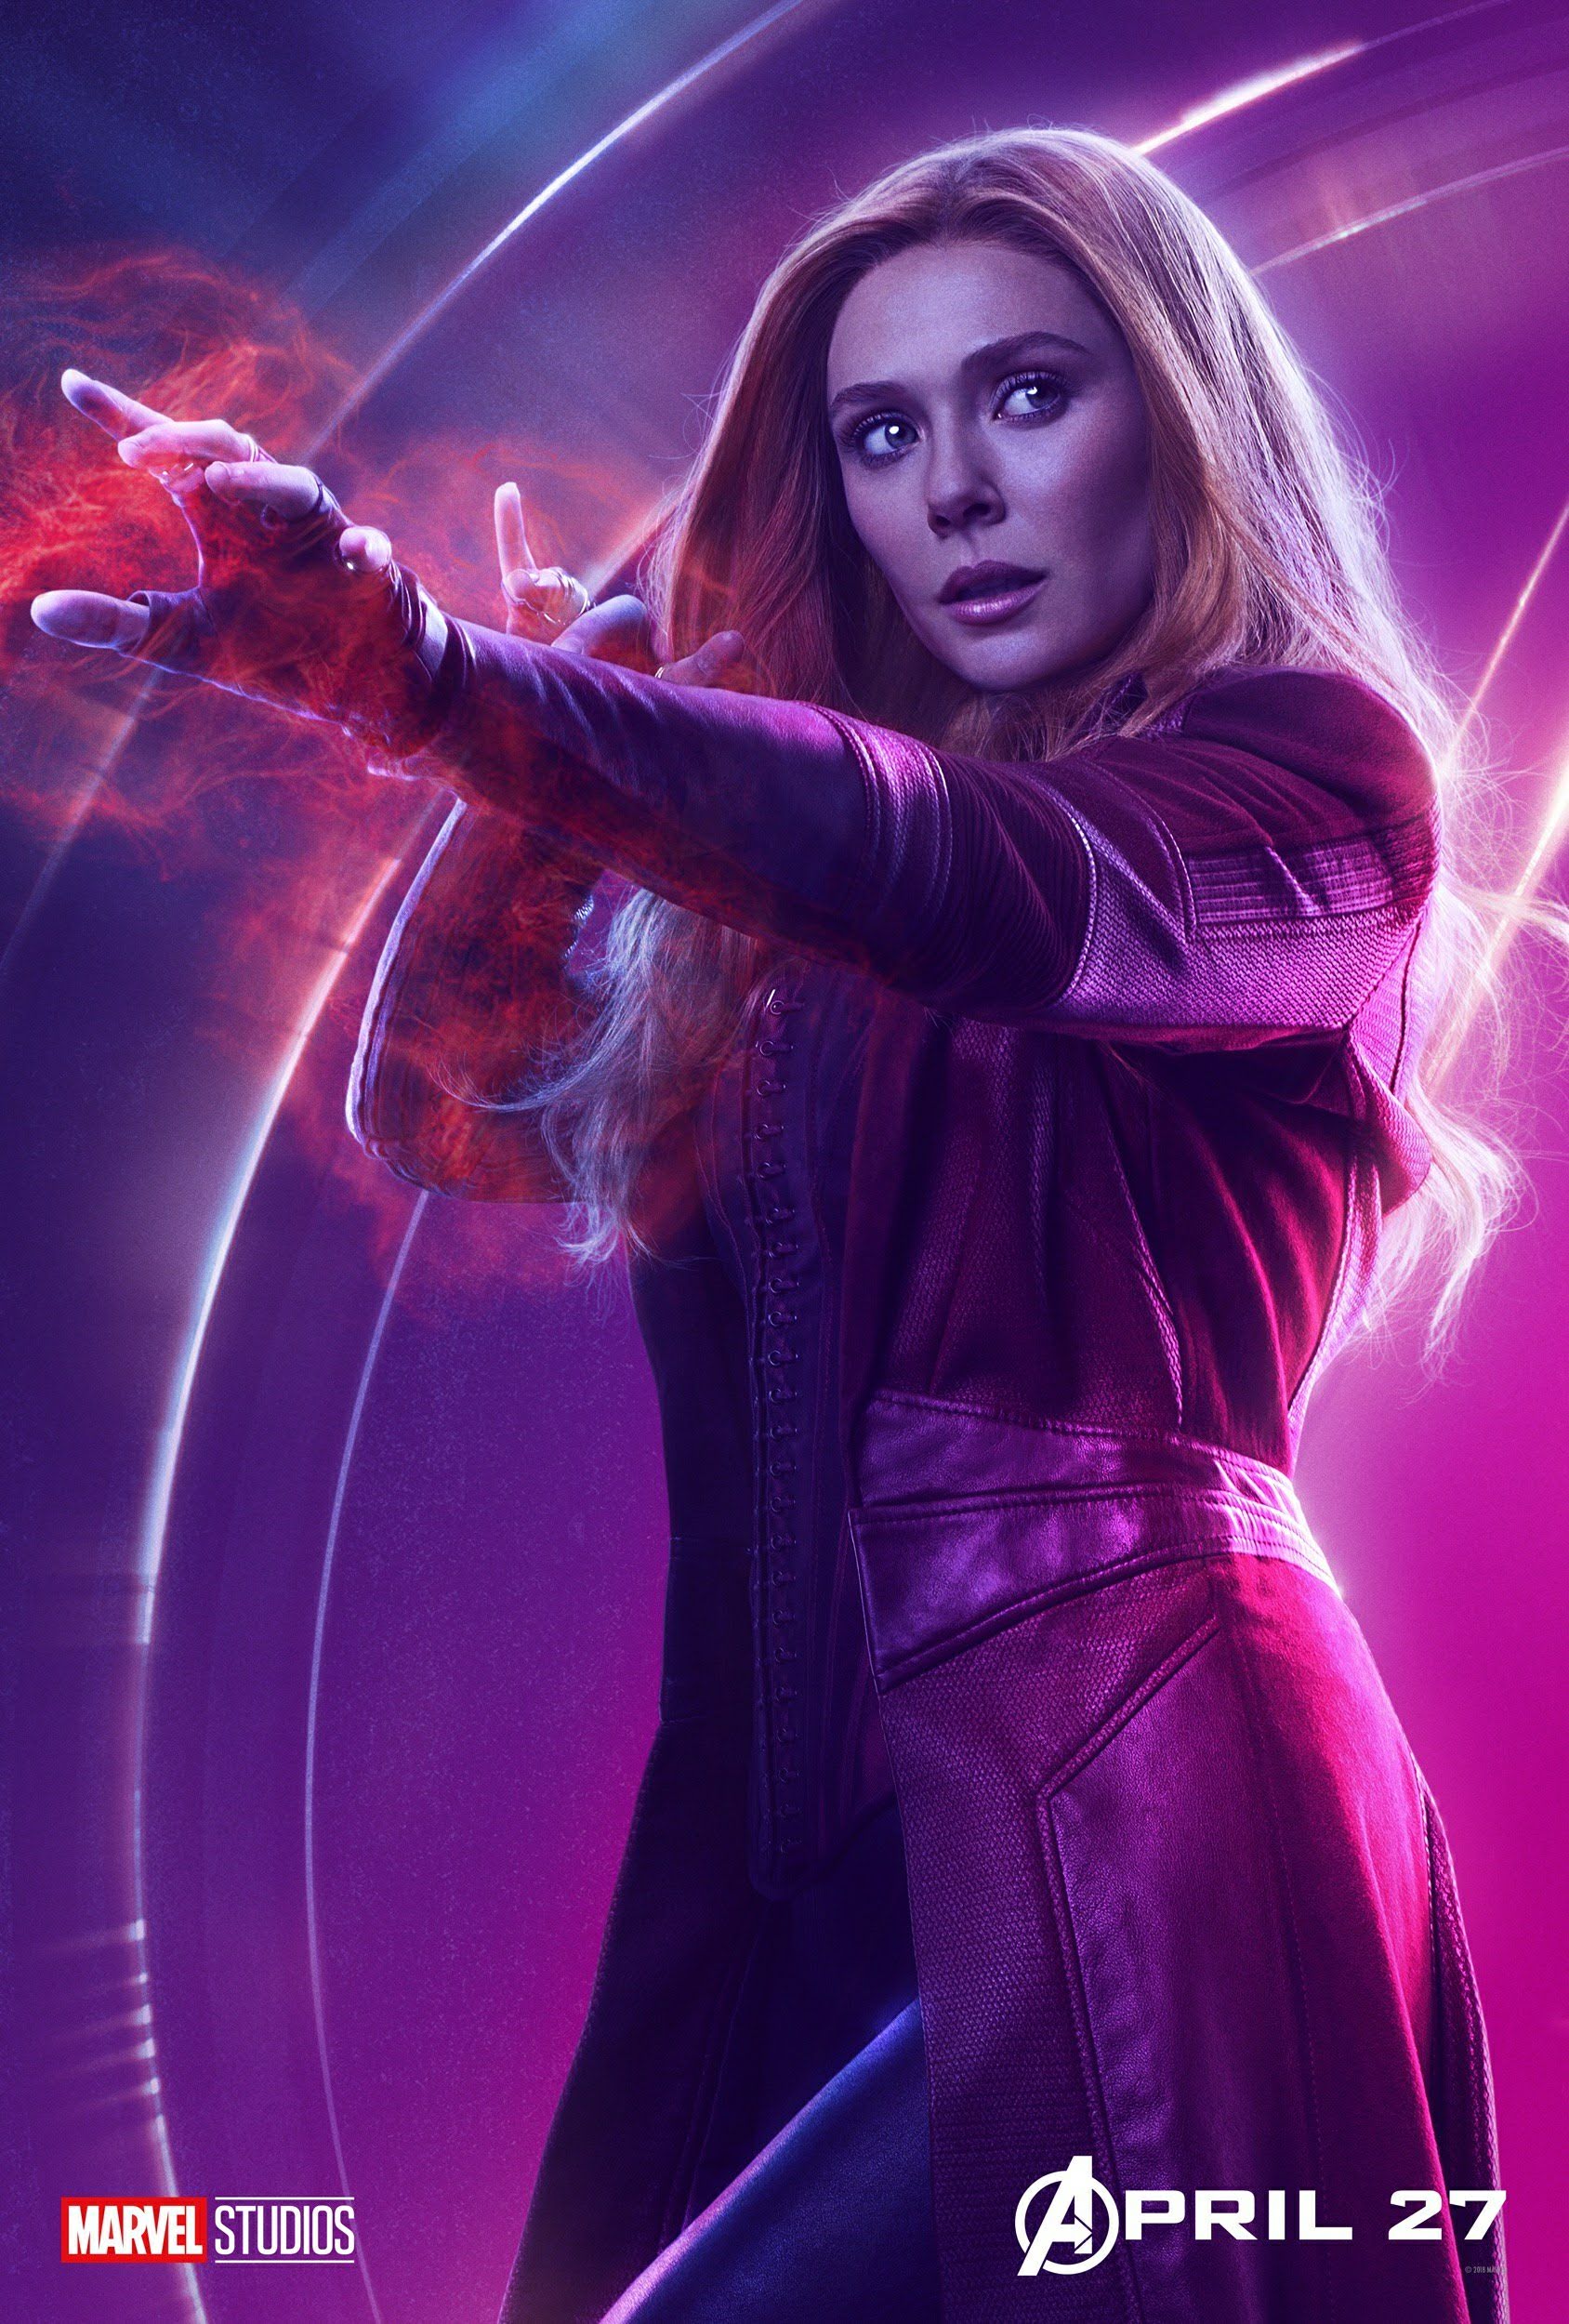 Scarlet Witch. Ultimate Marvel Cinematic Universe